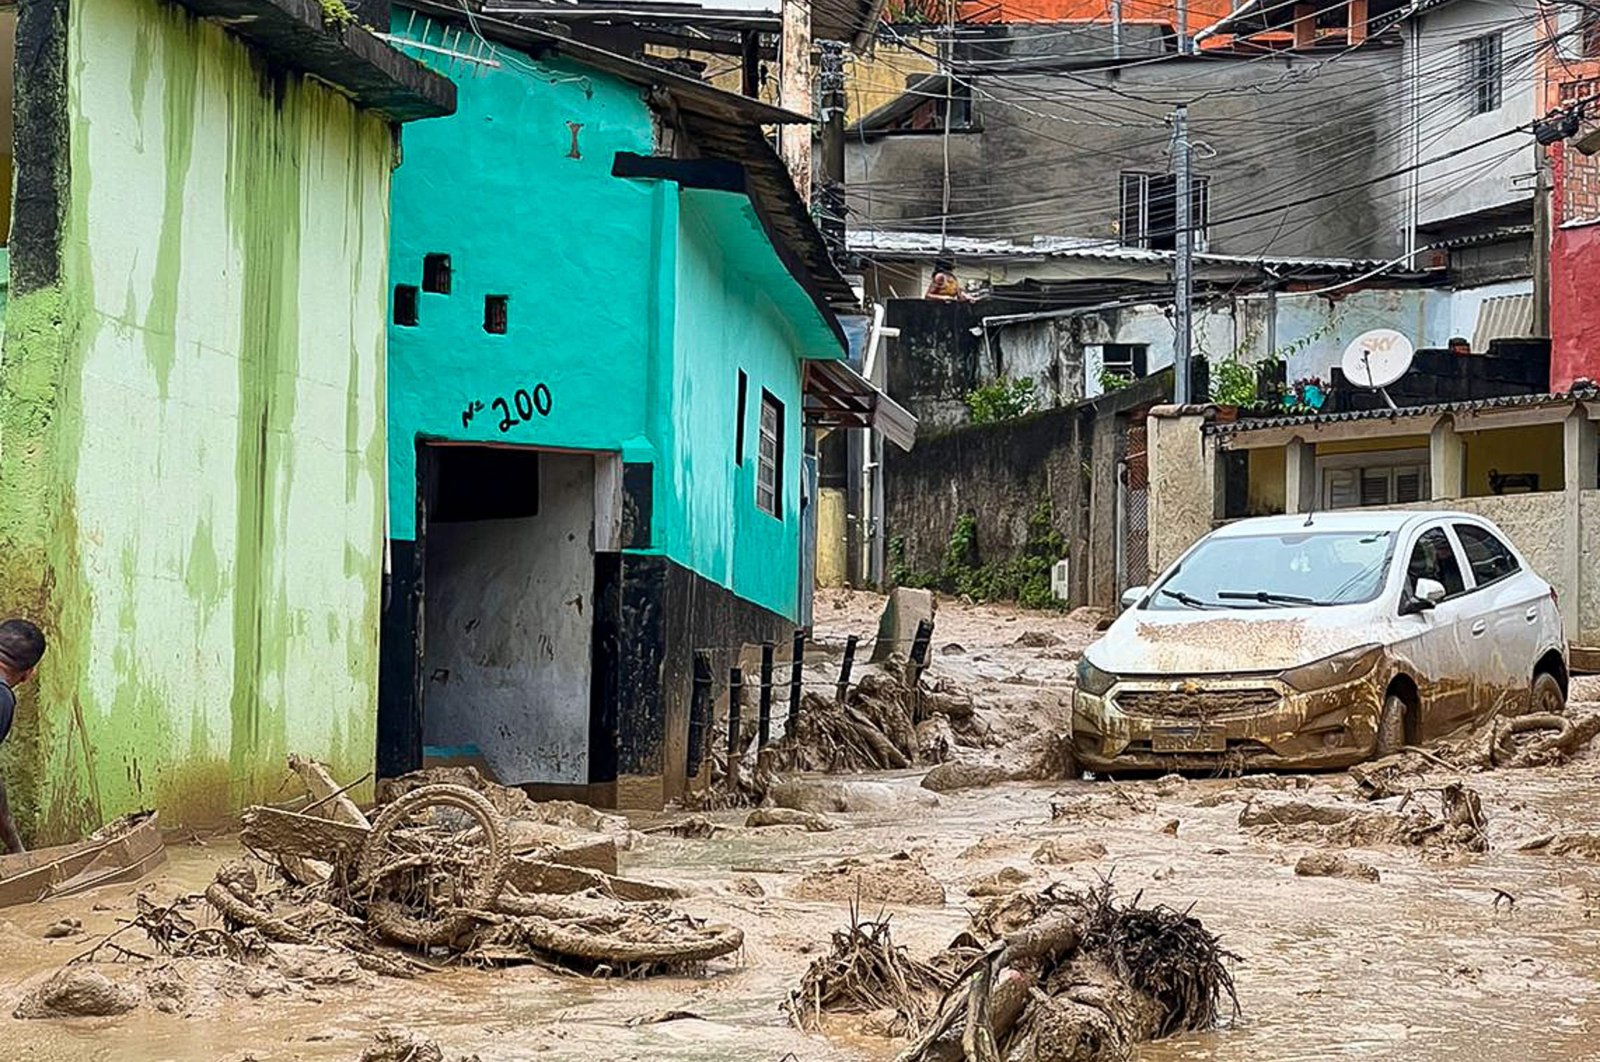 The scale of the damage caused by heavy rains can be seen in the municipality of Sao Sebastiao, Sao Paulo, Brazil, Feb. 19, 2023. (AFP Photo)